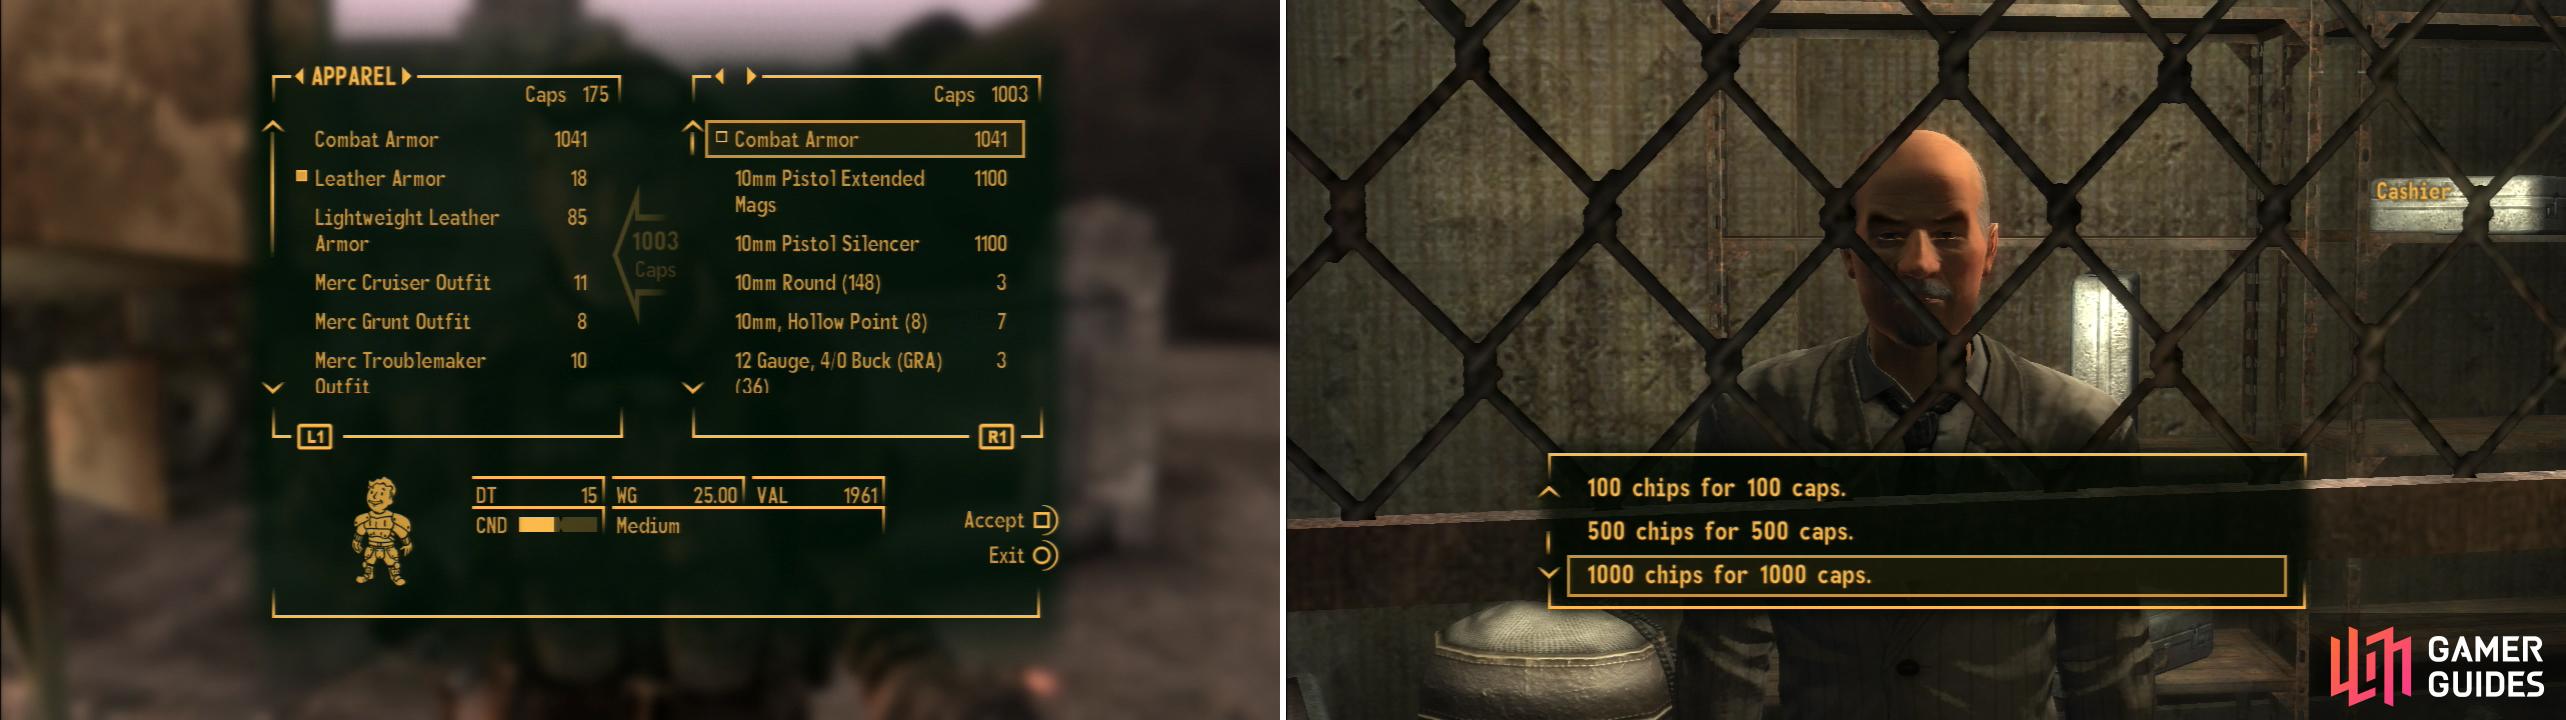 Sell a suit of Combat Armor at The 188 Trading Post (left) which will provide you with the initial Caps you’ll need to fund your gambling (right).